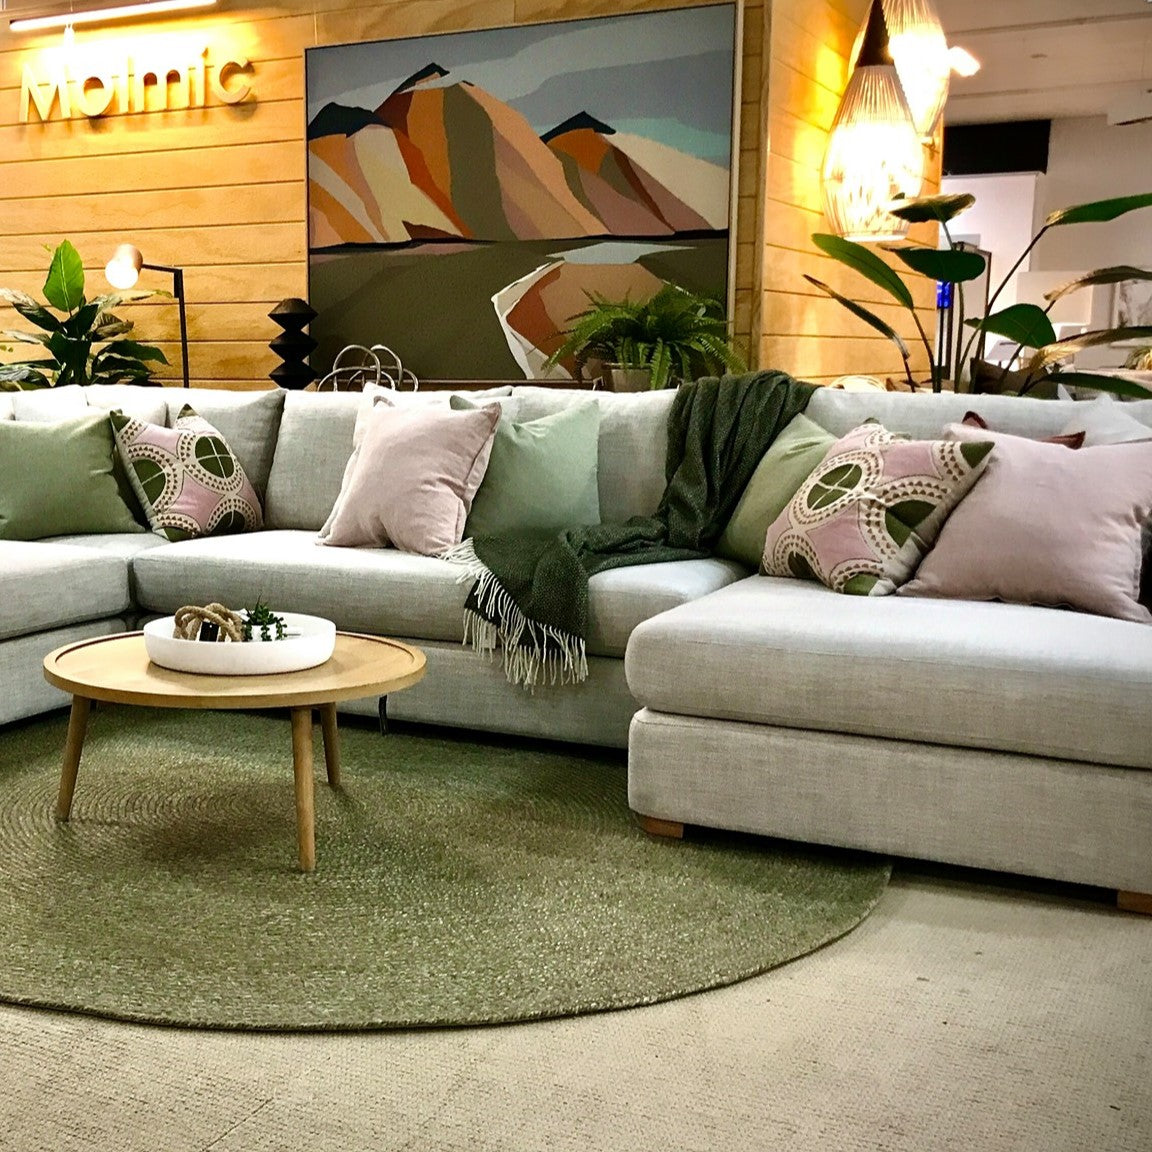 Palisades Modular Sofa by Molmic available from Make Your House A Home, Furniture Store located in Bendigo, Victoria. Australian Made in Melbourne.